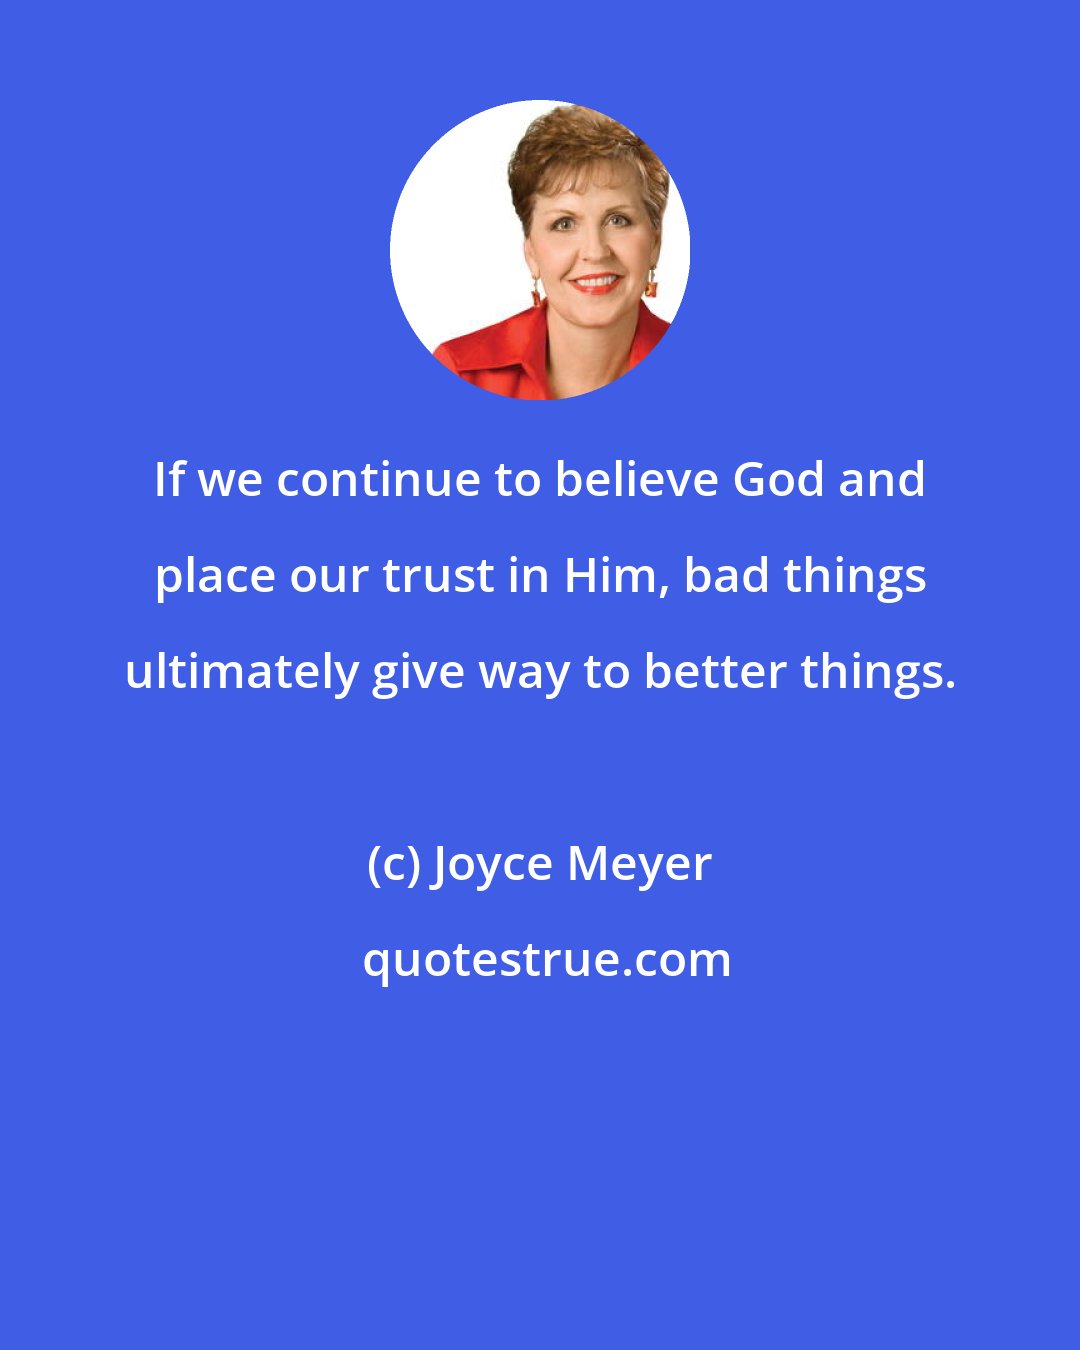 Joyce Meyer: If we continue to believe God and place our trust in Him, bad things ultimately give way to better things.